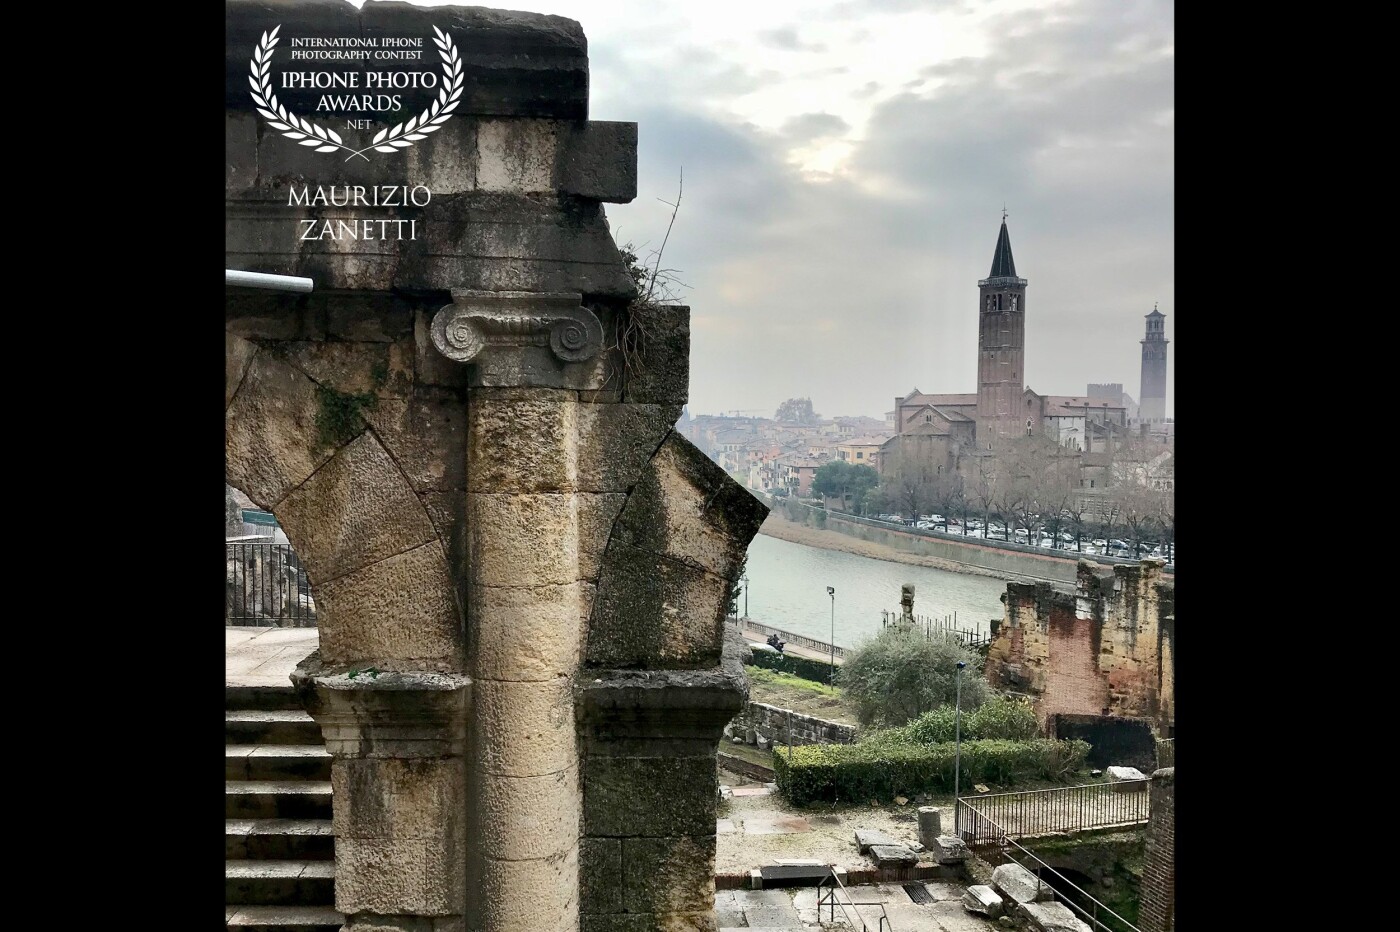 The ancient walls of the Roman Theater wet from the rain. In the background "the beautiful Verona" with its Adige river and the church of Sant'Anastasia